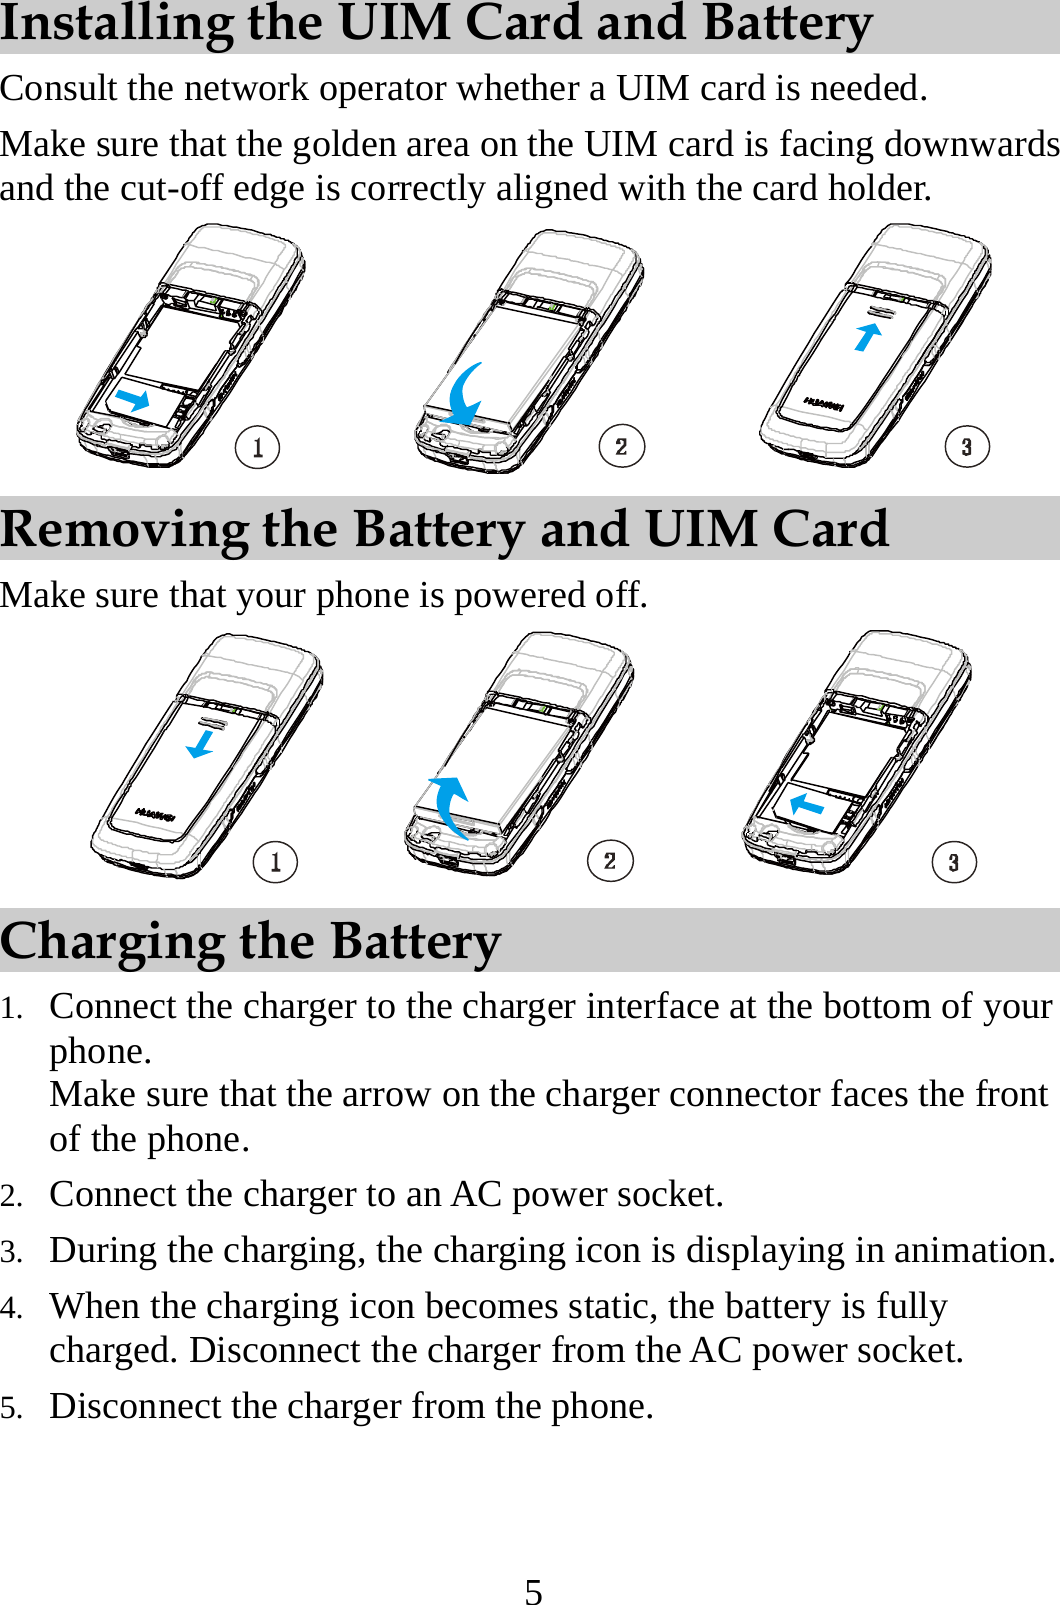 5 Installing the UIM Card and Battery Consult the network operator whether a UIM card is needed. Make sure that the golden area on the UIM card is facing downwards and the cut-off edge is correctly aligned with the card holder.  Removing the Battery and UIM Card Make sure that your phone is powered off.  Charging the Battery 1. Connect the charger to the charger interface at the bottom of your phone. Make sure that the arrow on the charger connector faces the front of the phone. 2. Connect the charger to an AC power socket. 3. During the charging, the charging icon is displaying in animation. 4. When the charging icon becomes static, the battery is fully charged. Disconnect the charger from the AC power socket. 5. Disconnect the charger from the phone. 